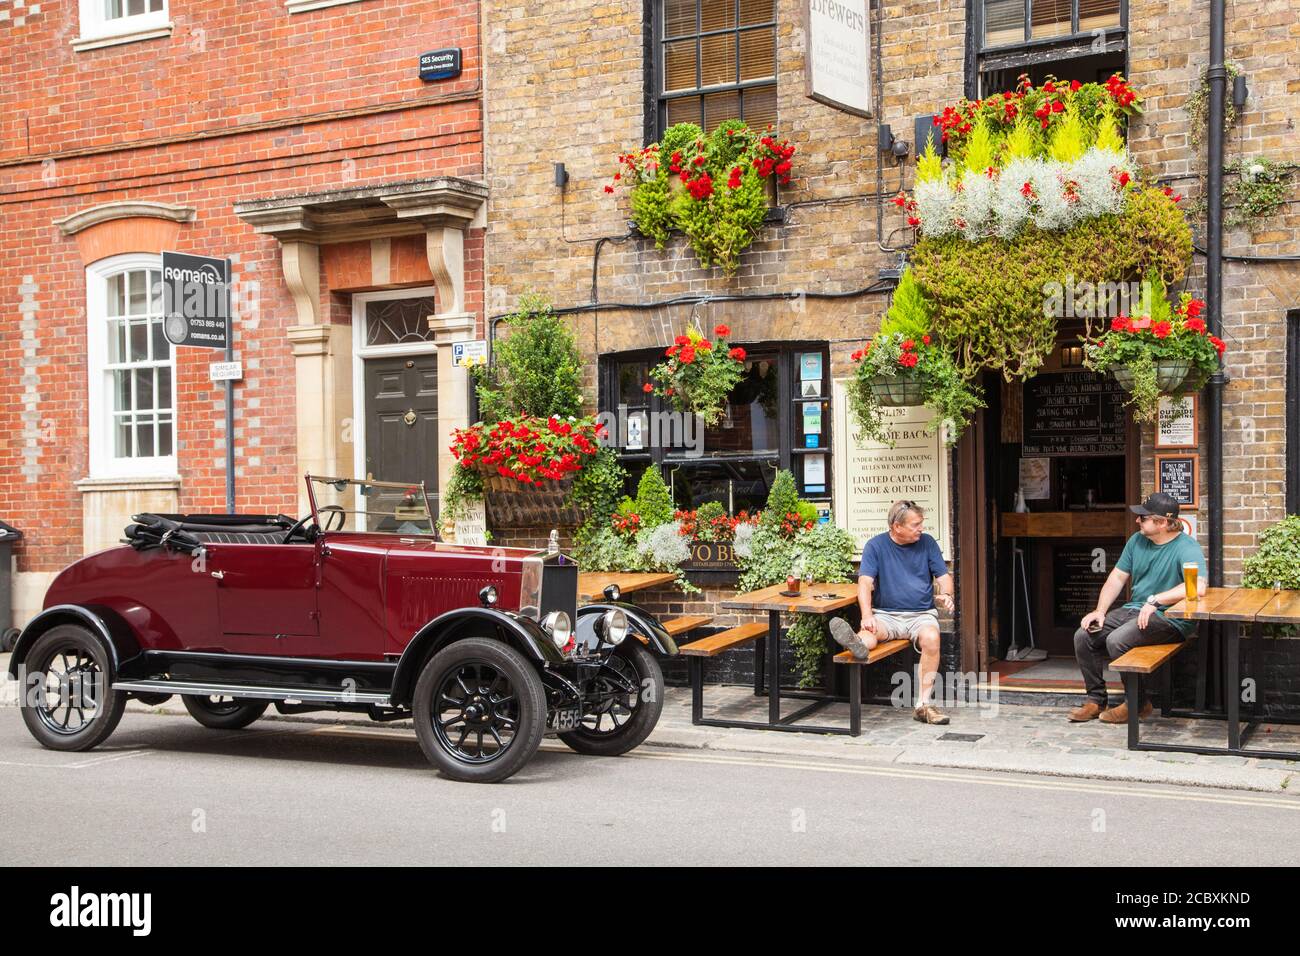 Vintage Morris Cowley motor car outside a traditional English pub public house the Two Brewers on Park Street in Windsor Berkshire England UK Stock Photo